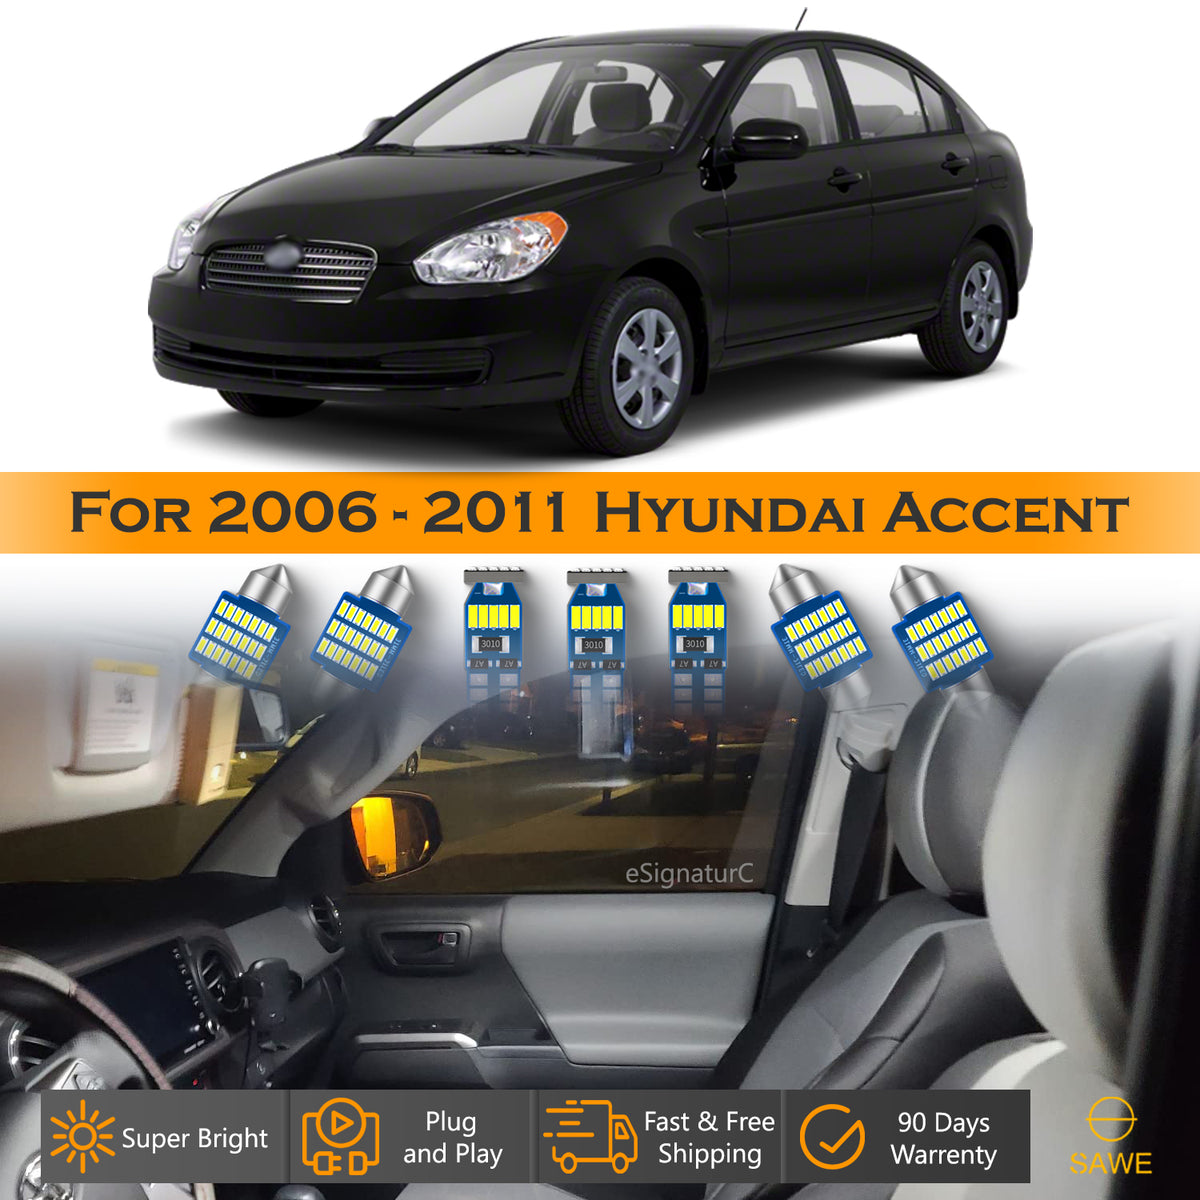 For Hyundai Accent Interior LED Lights - Dome & Map Light Bulbs Package Kit for 2006 - 2011 - White